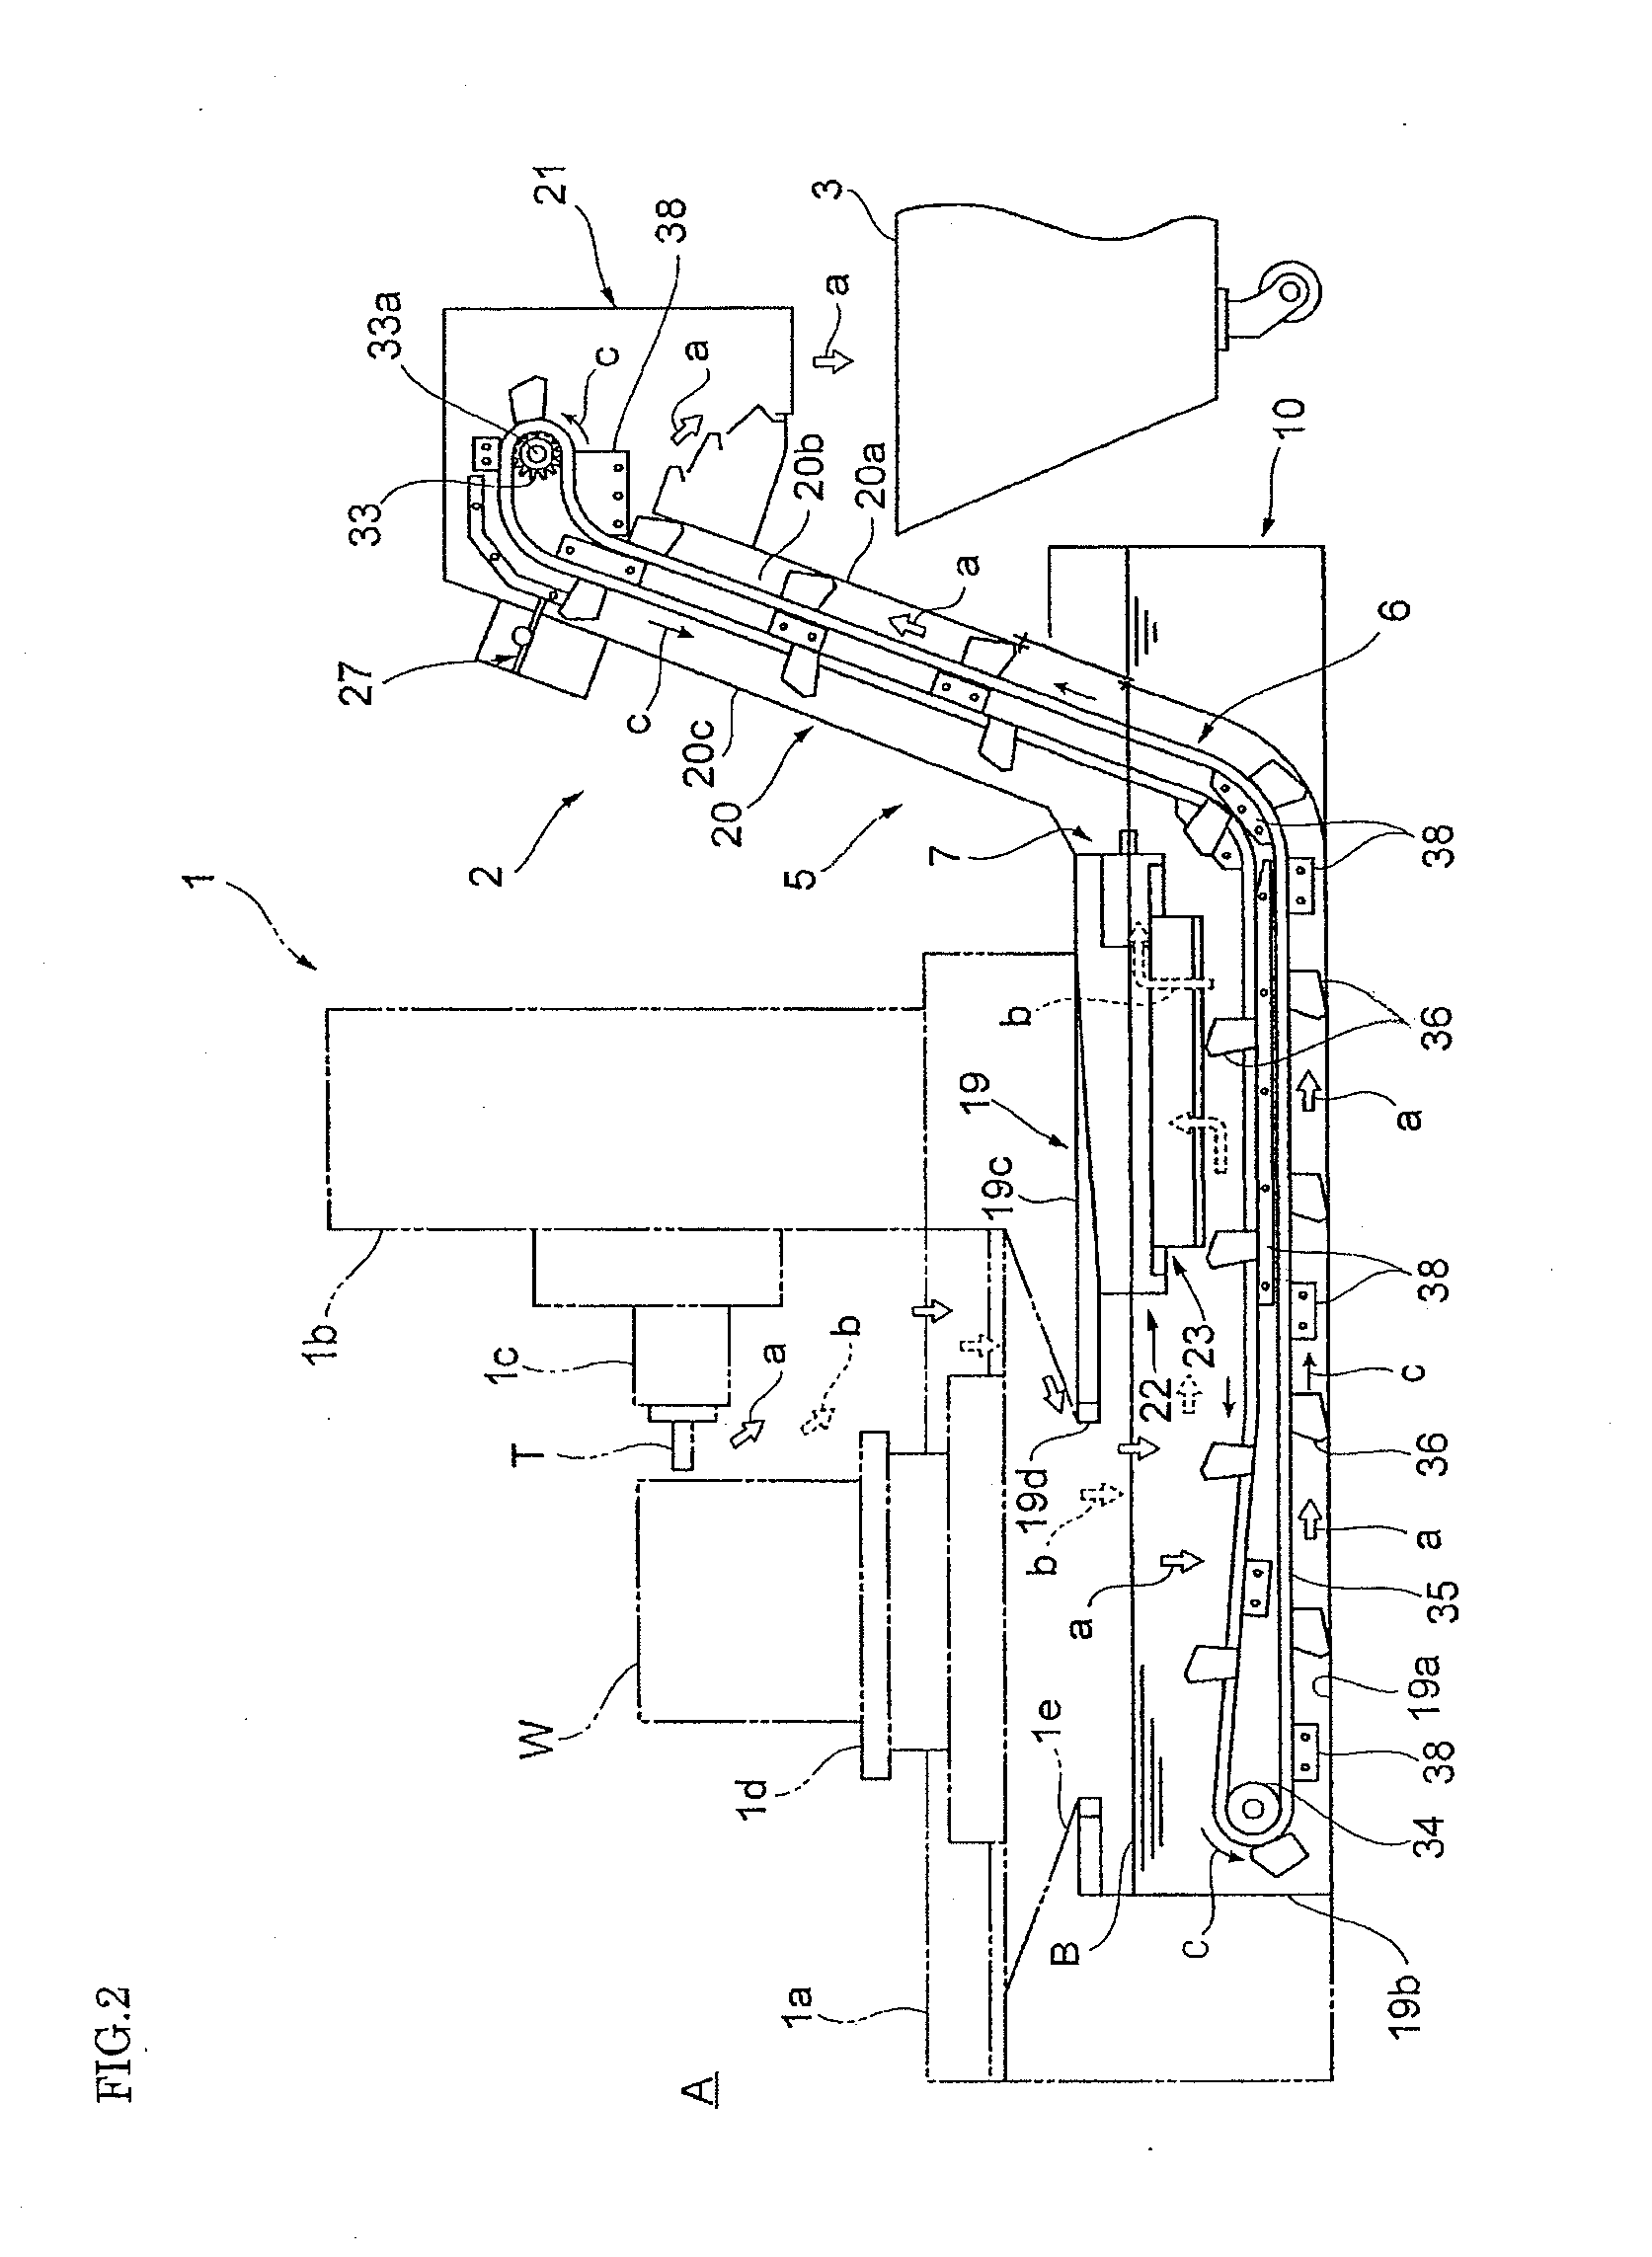 Chip disposal device of machine tool